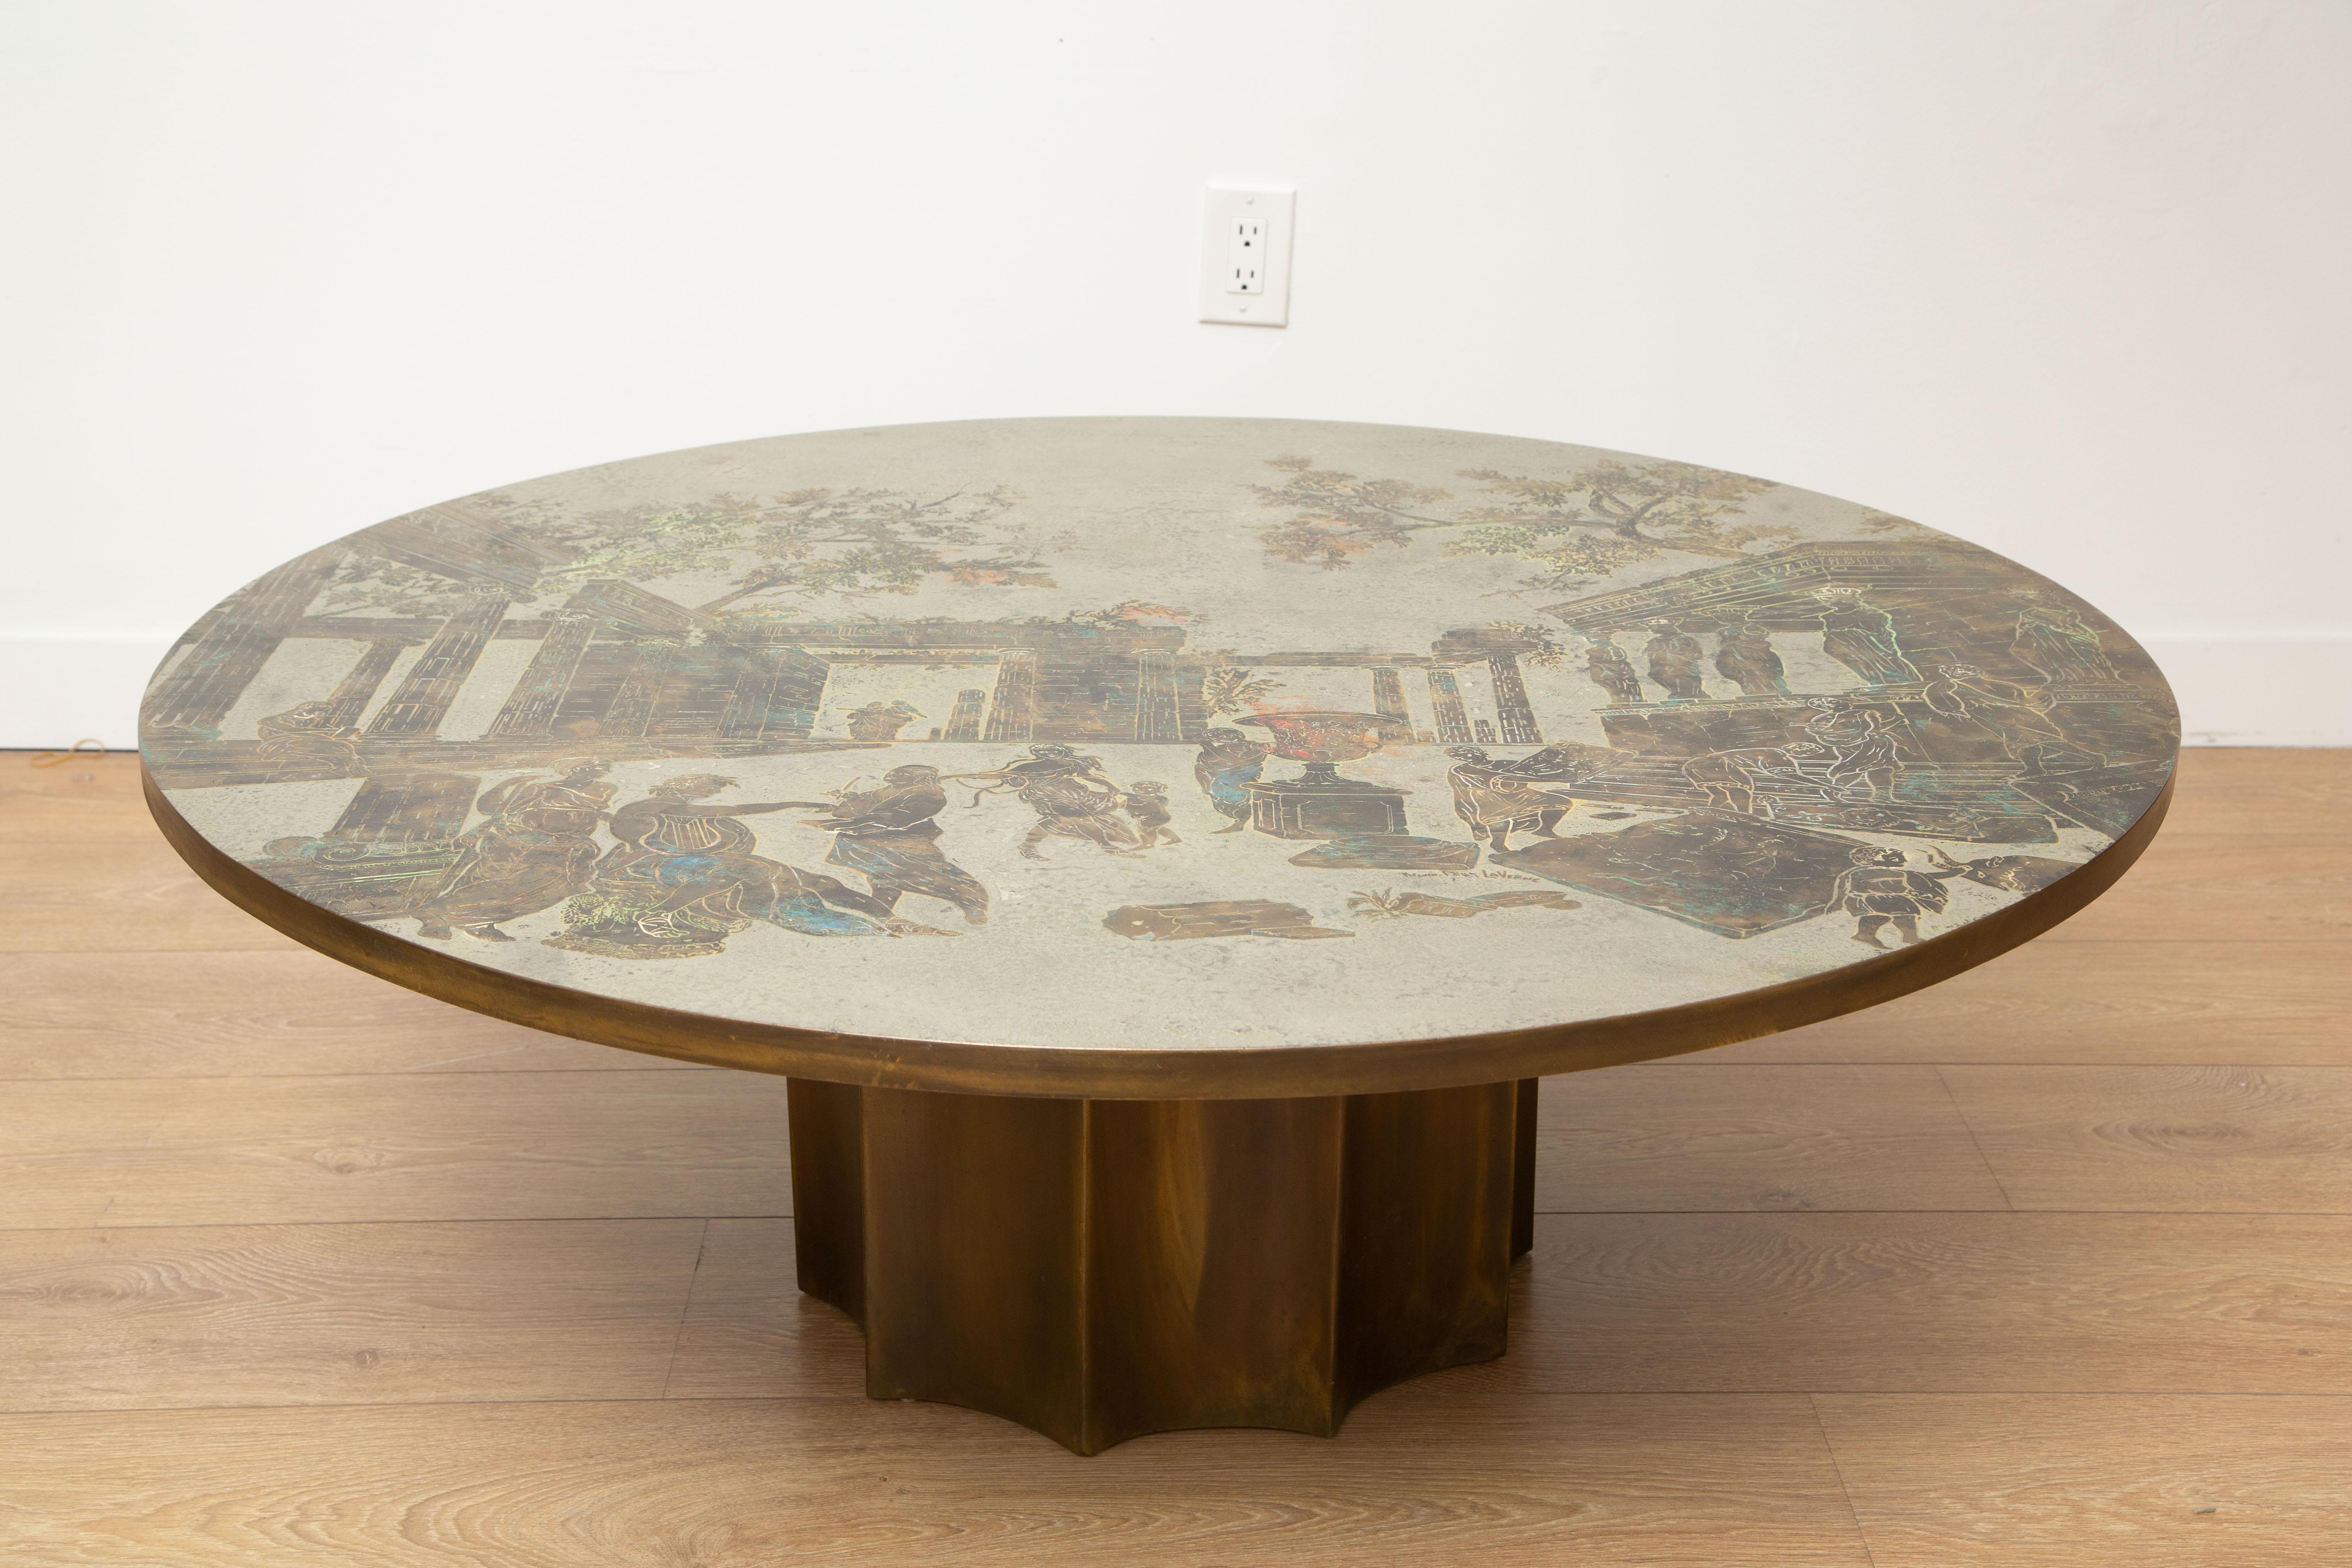 Philip and Kelvin LaVerne Odyssey round coffee table, New York, circa 1960's, 
Etched, patinated and polychromed bronze and pewter, 
Superb patina retaining all originals various rich and soft colors 
Scene of everyday life in ancient Greece
Signed